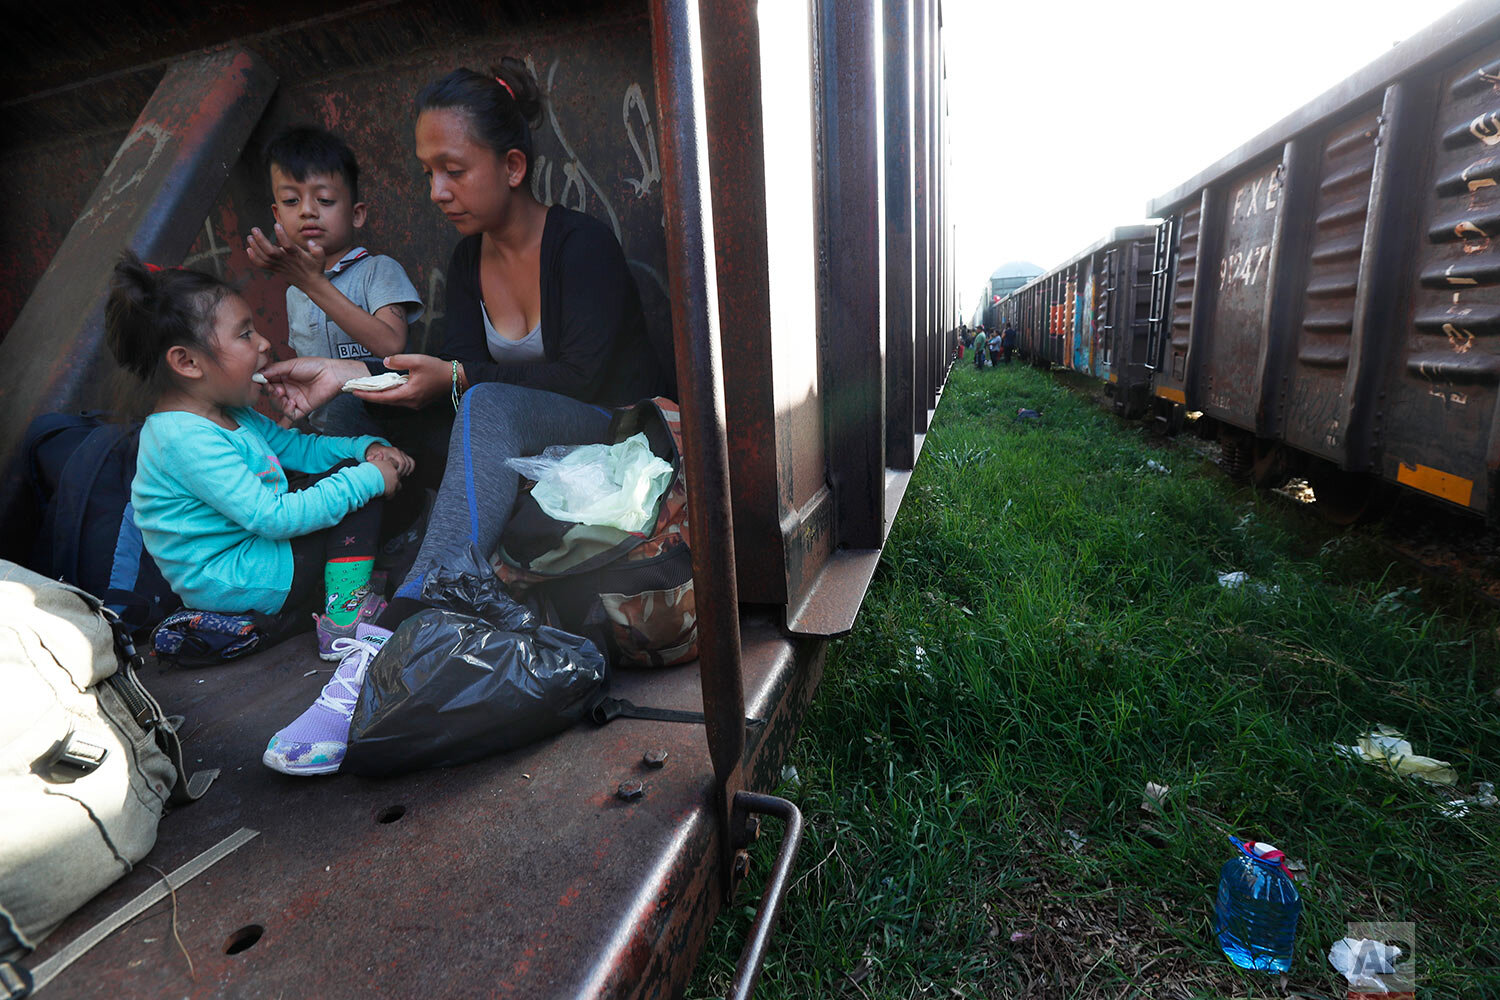  A migrant mother and children ride a freight train on their way north, in Palenque, Chiapas state, Mexico, Monday, June 24, 2019. Their next stop will be Coatzacoalcos, Veracruz state. Mexico has deployed 6,500 National Guard members in the southern